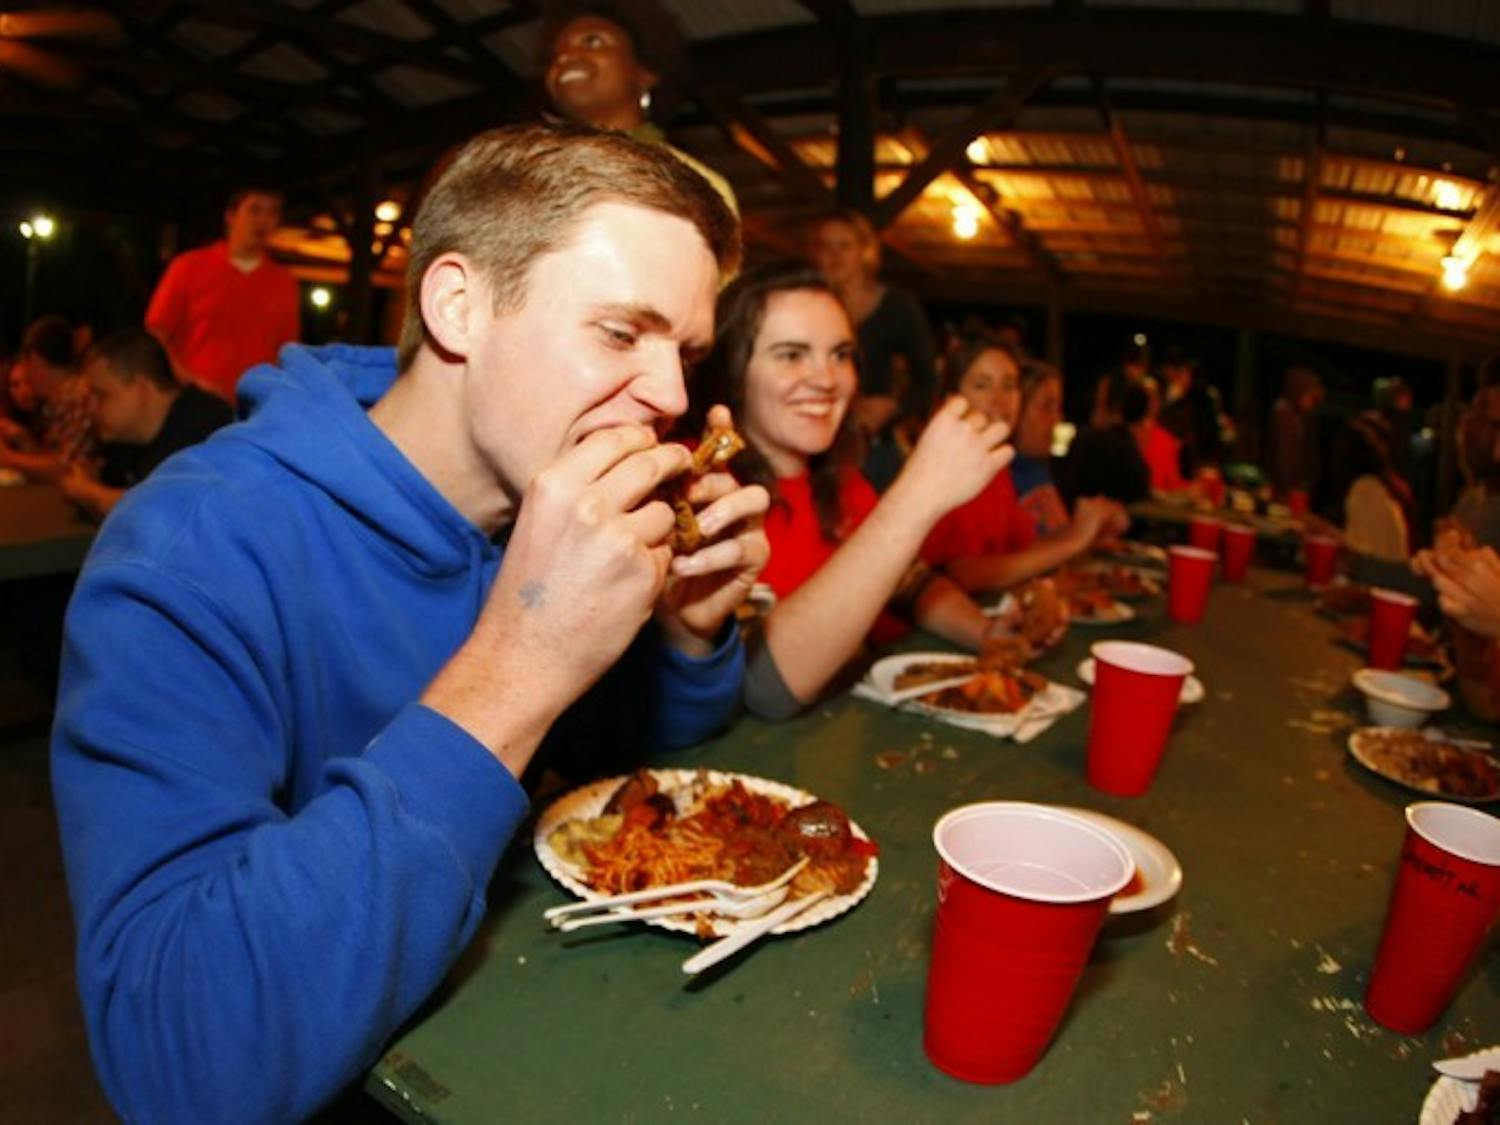 Civil engineering major Kyle Mays, 19, eats a piece of fried quail at the 29th annual Beast Feast on Saturday night. The event was sponsored by the UF Wildlife Society.